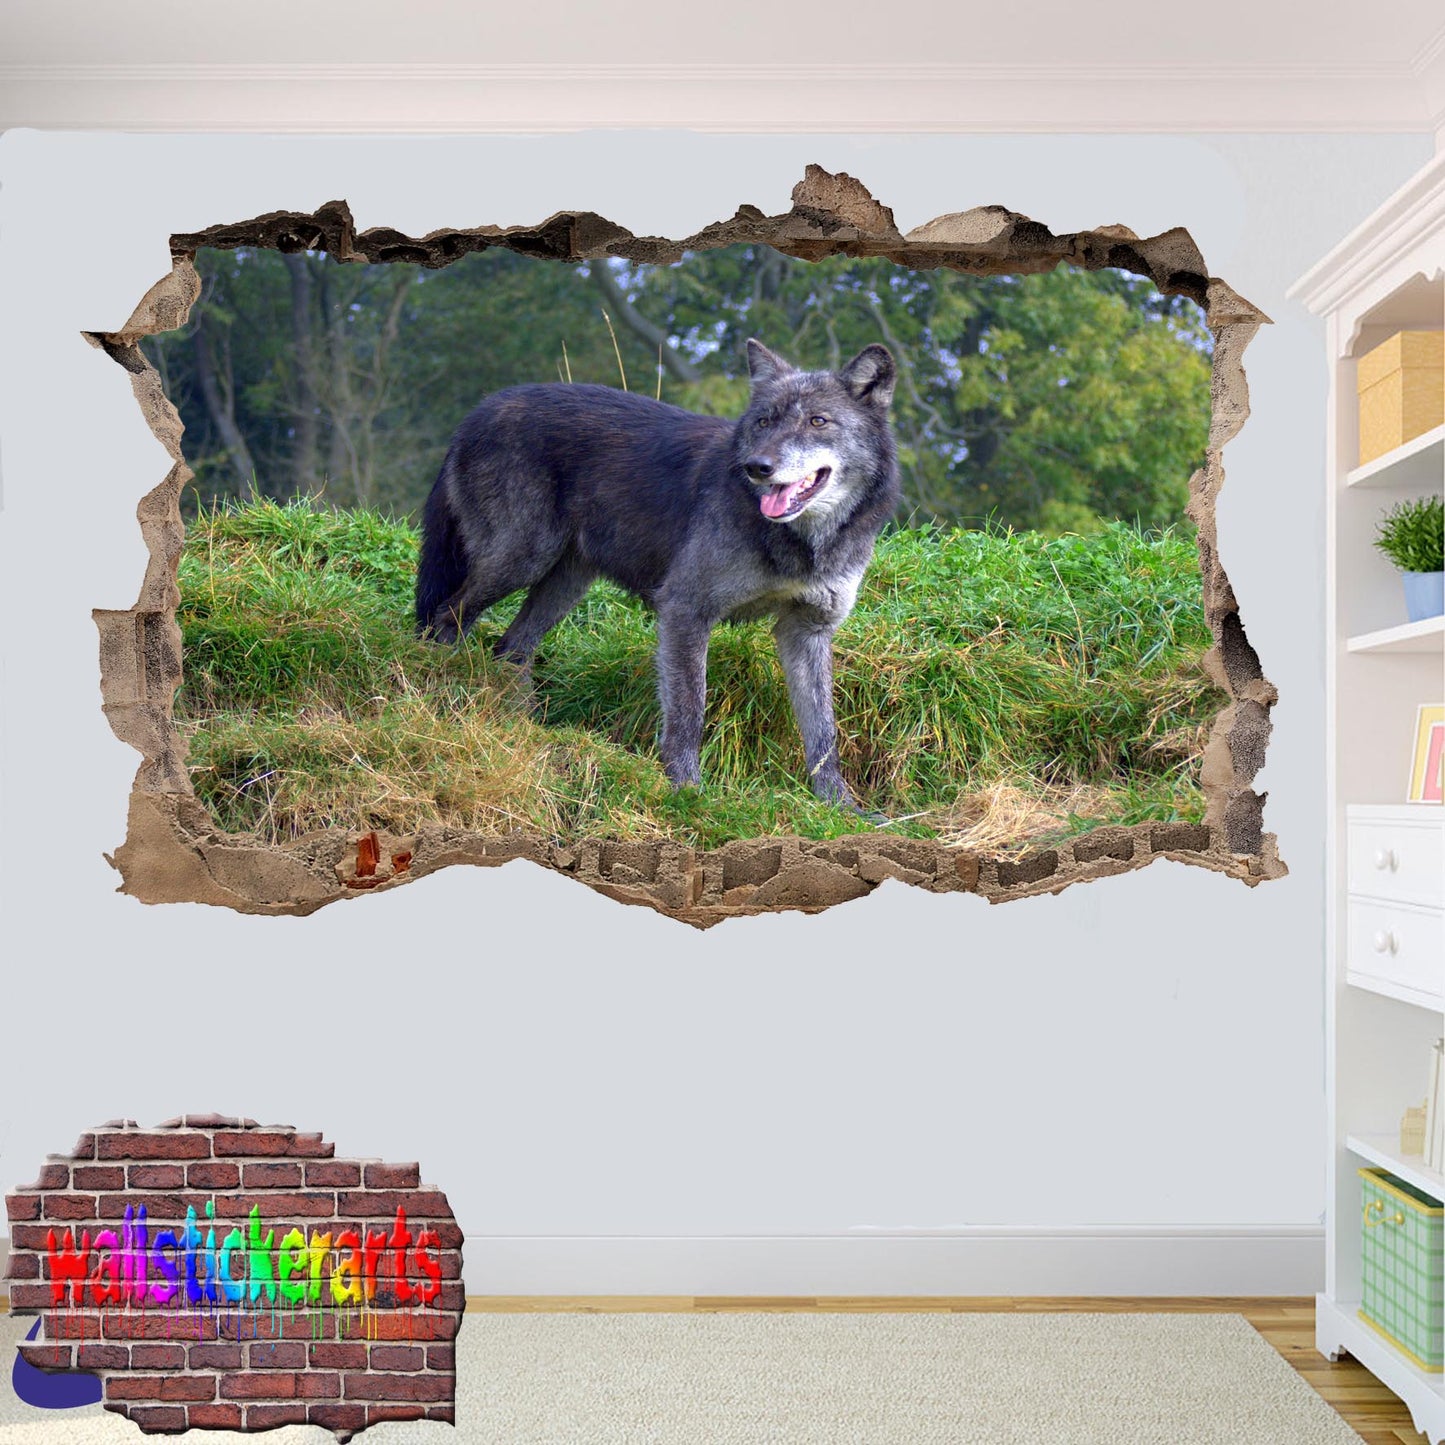 Wildlife Animals Grey Wolf 3d Art Smashed Effect Wall Stickers Room Office Nursery Shop Decor Decal Mural